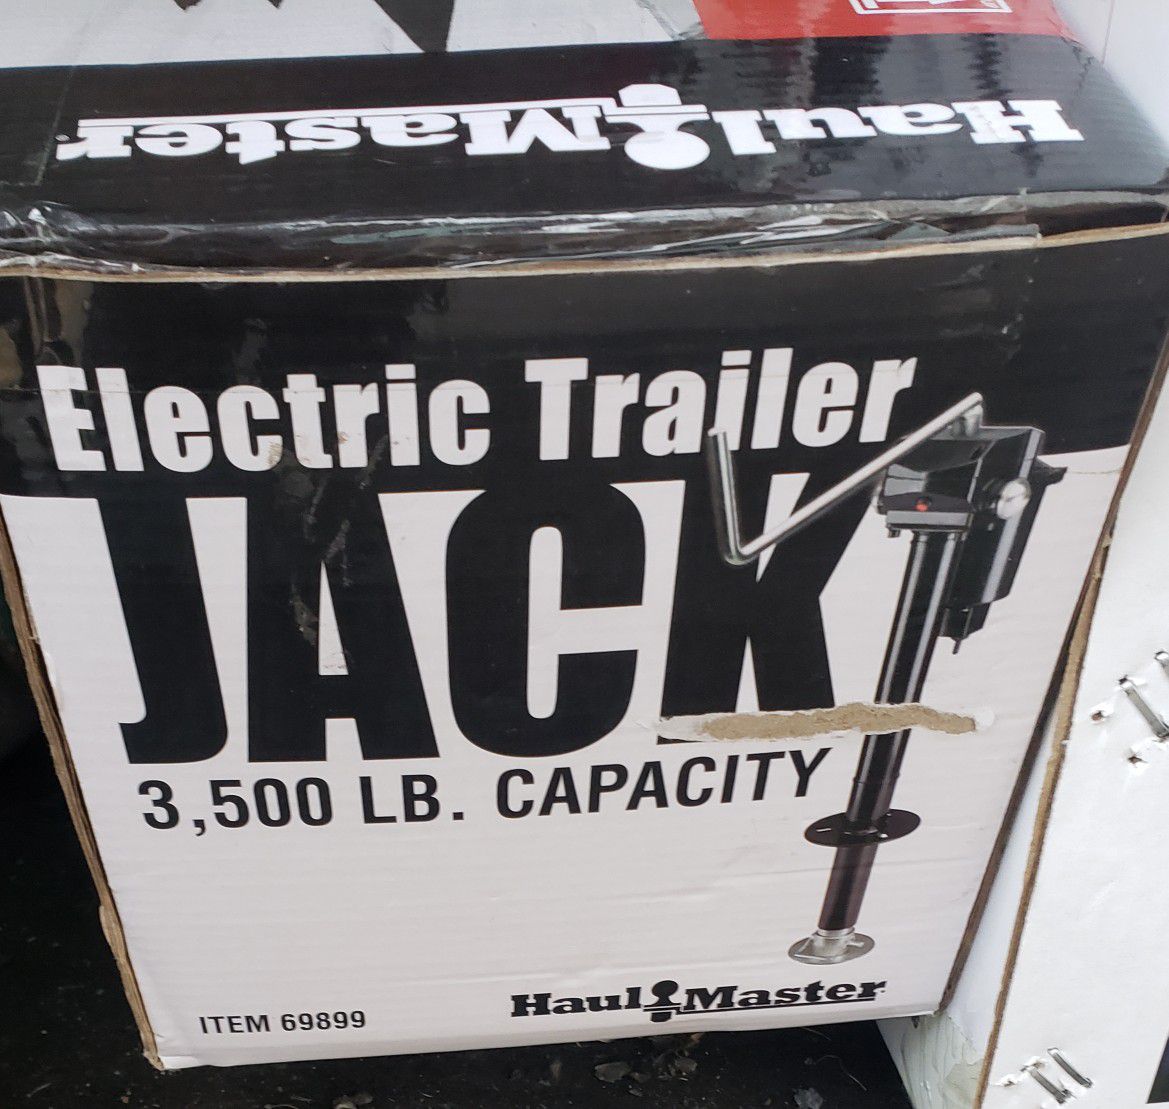 Trailer jack NEW, *ELECTRIC